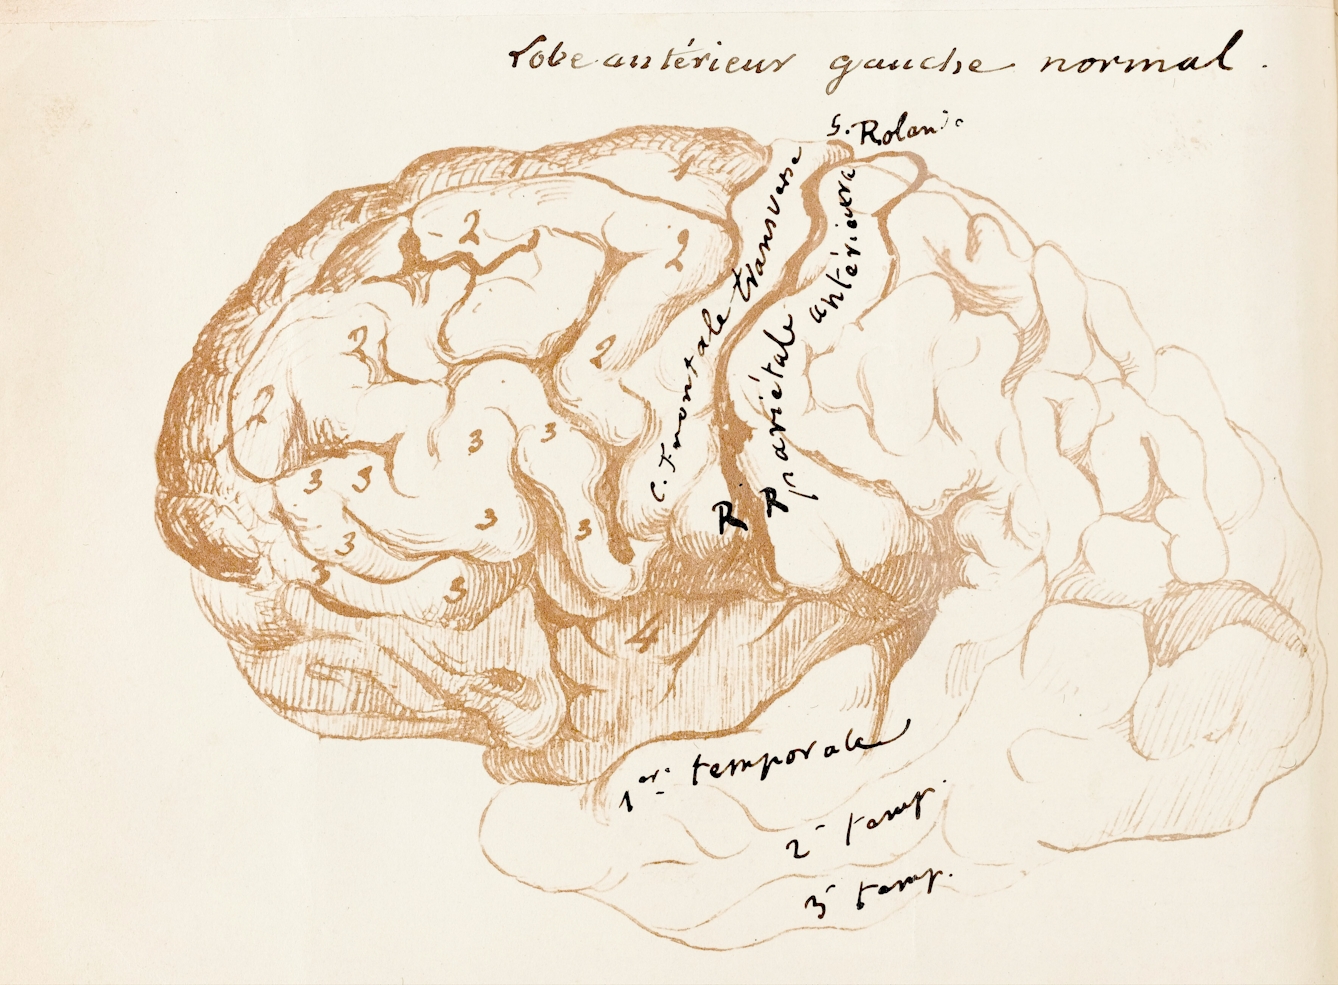 Scientific sketch of a human brain with areas of the frontal lobe numbered and labelled in French handwriting.